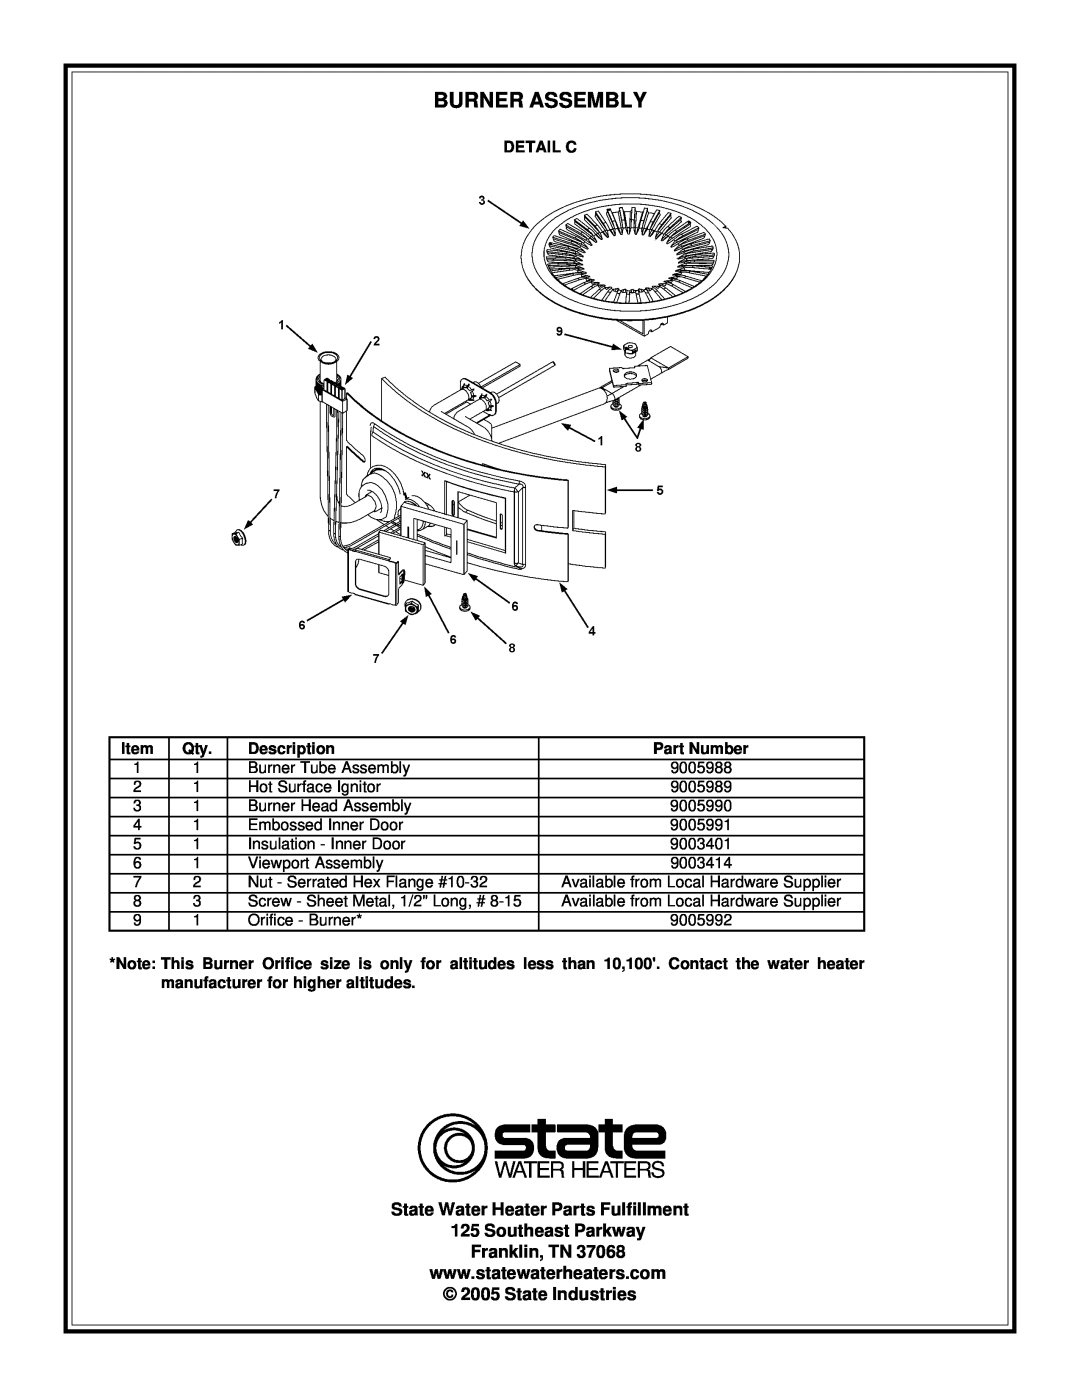 State Industries SHE50 76 manual Burner Assembly, Detail C, State Water Heater Parts Fulfillment 125 Southeast Parkway 